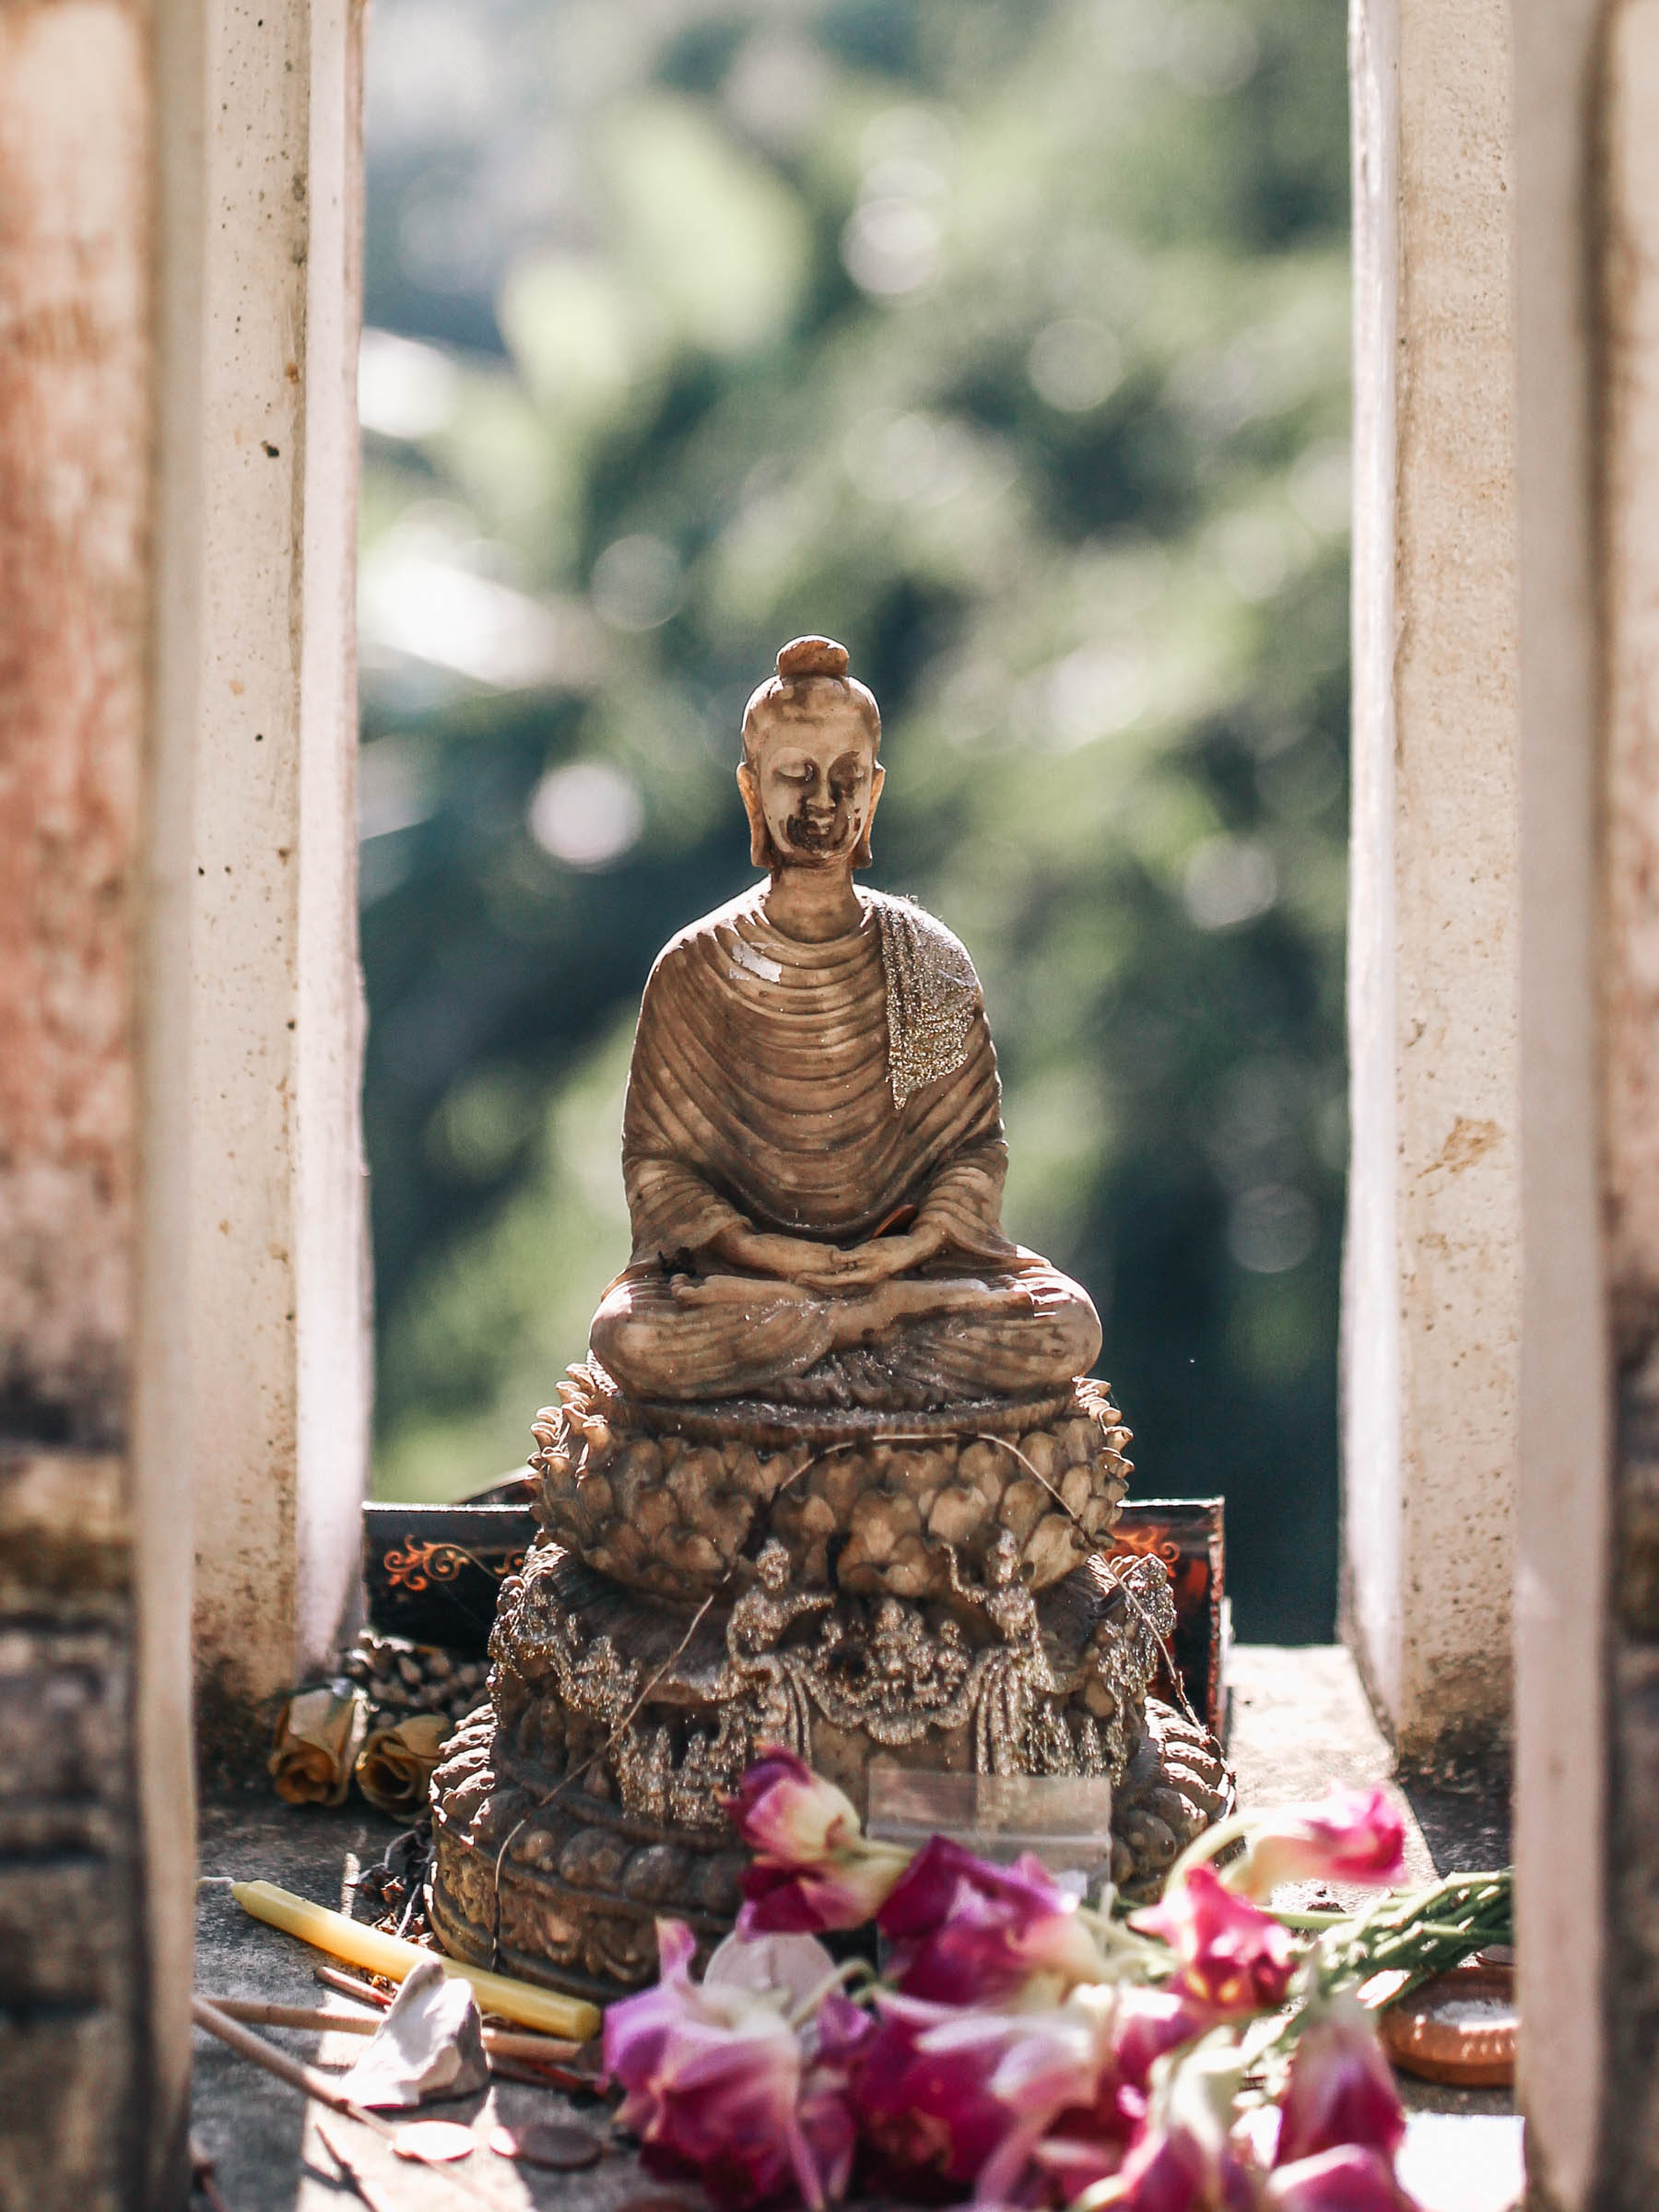 50 (Alnost) Free Things to Do in Chiang Mai: Meditation in Chiang Mai